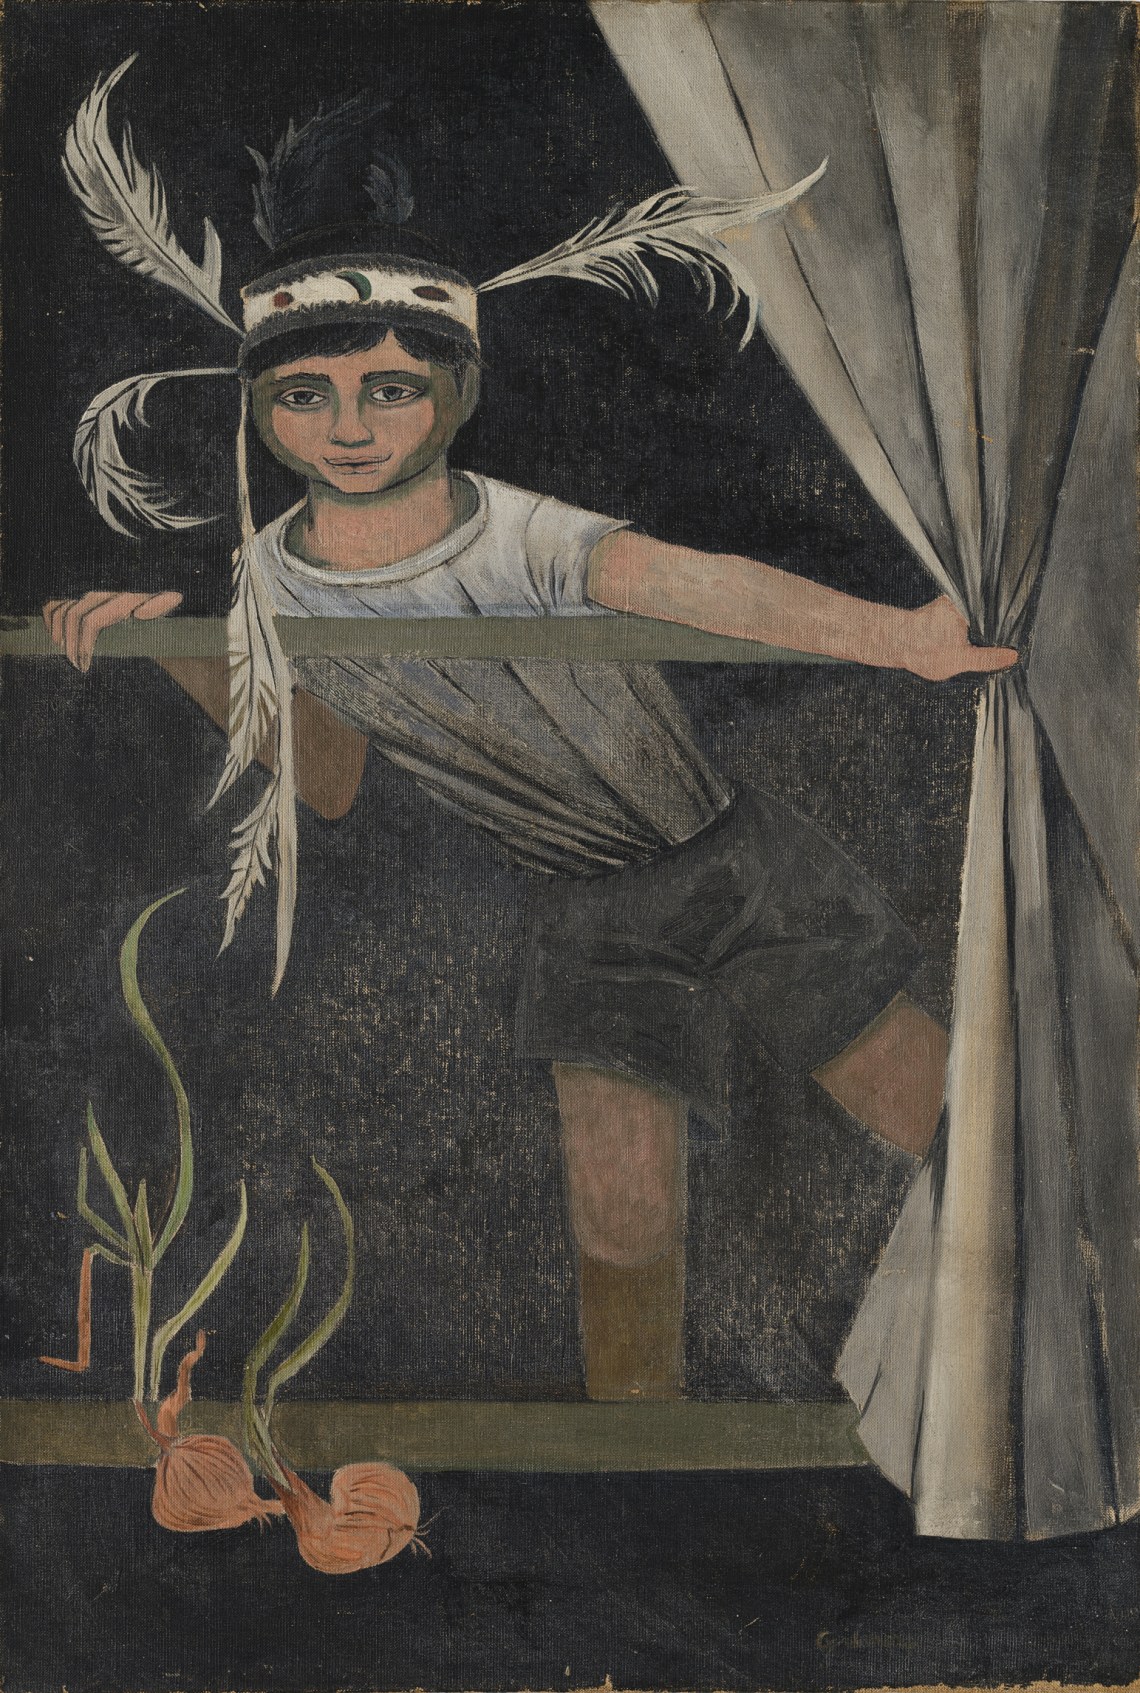 Painting of a boy in a feather headdress leaning out of a window with onions on the floor